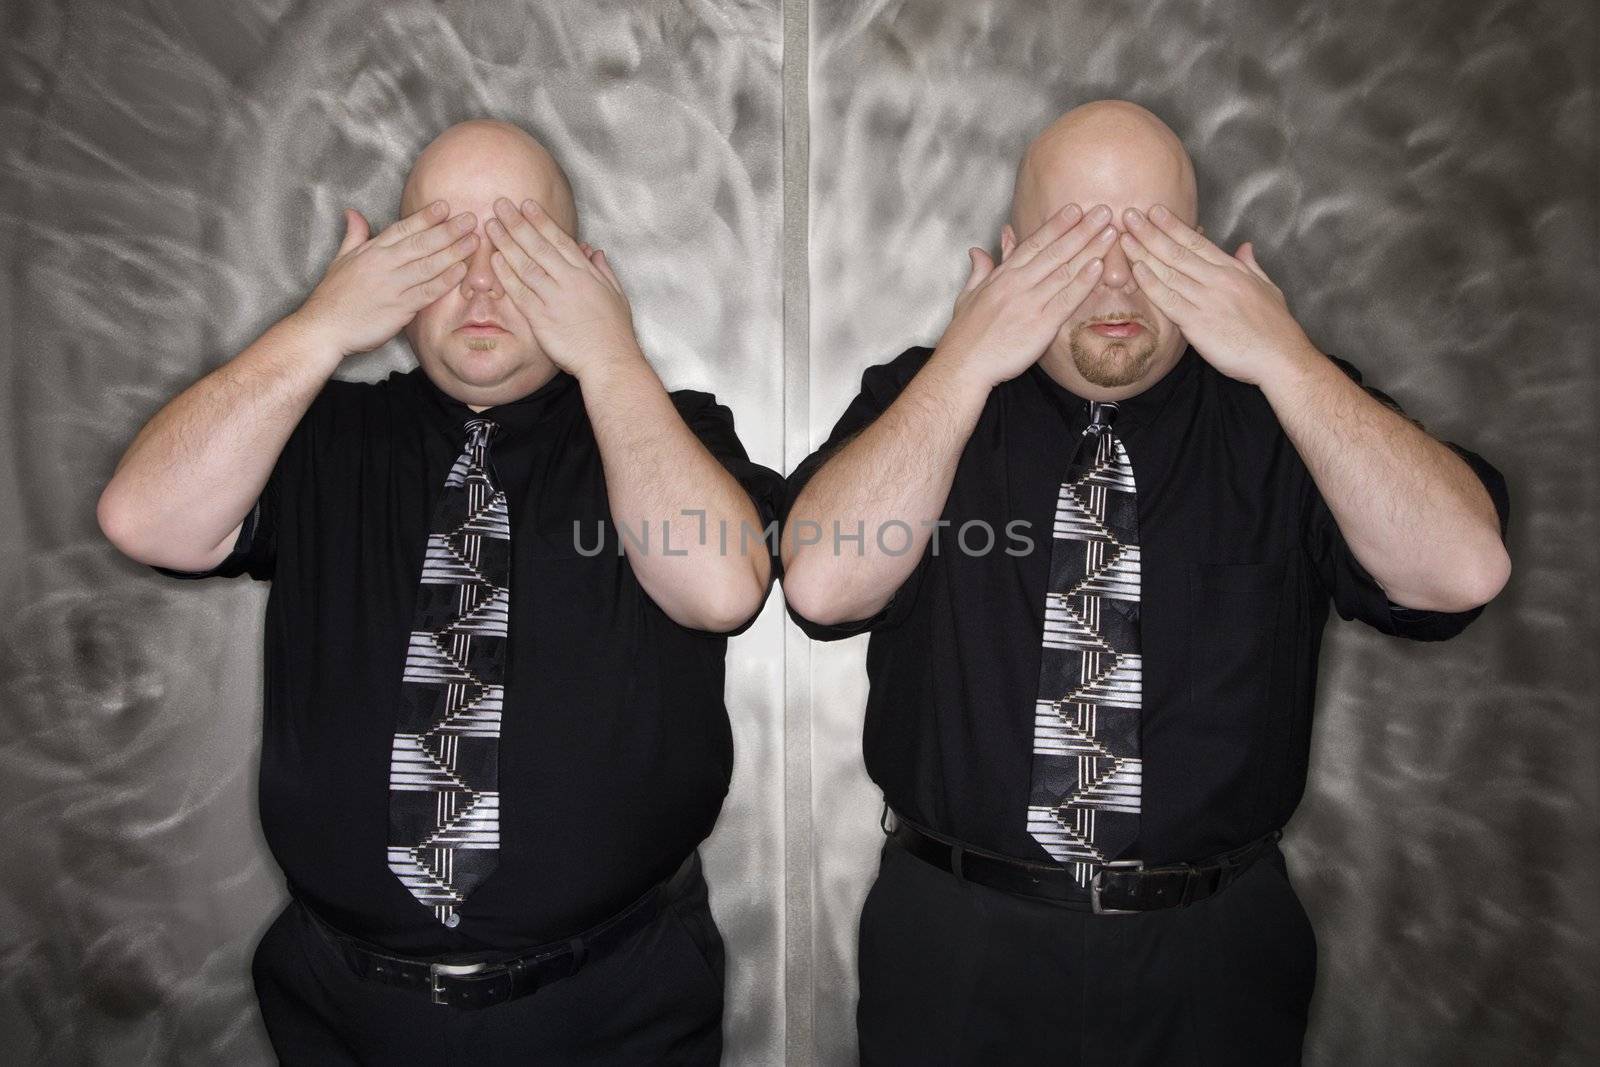 Caucasian bald mid adult identical twin men standing with hands covering eyes.